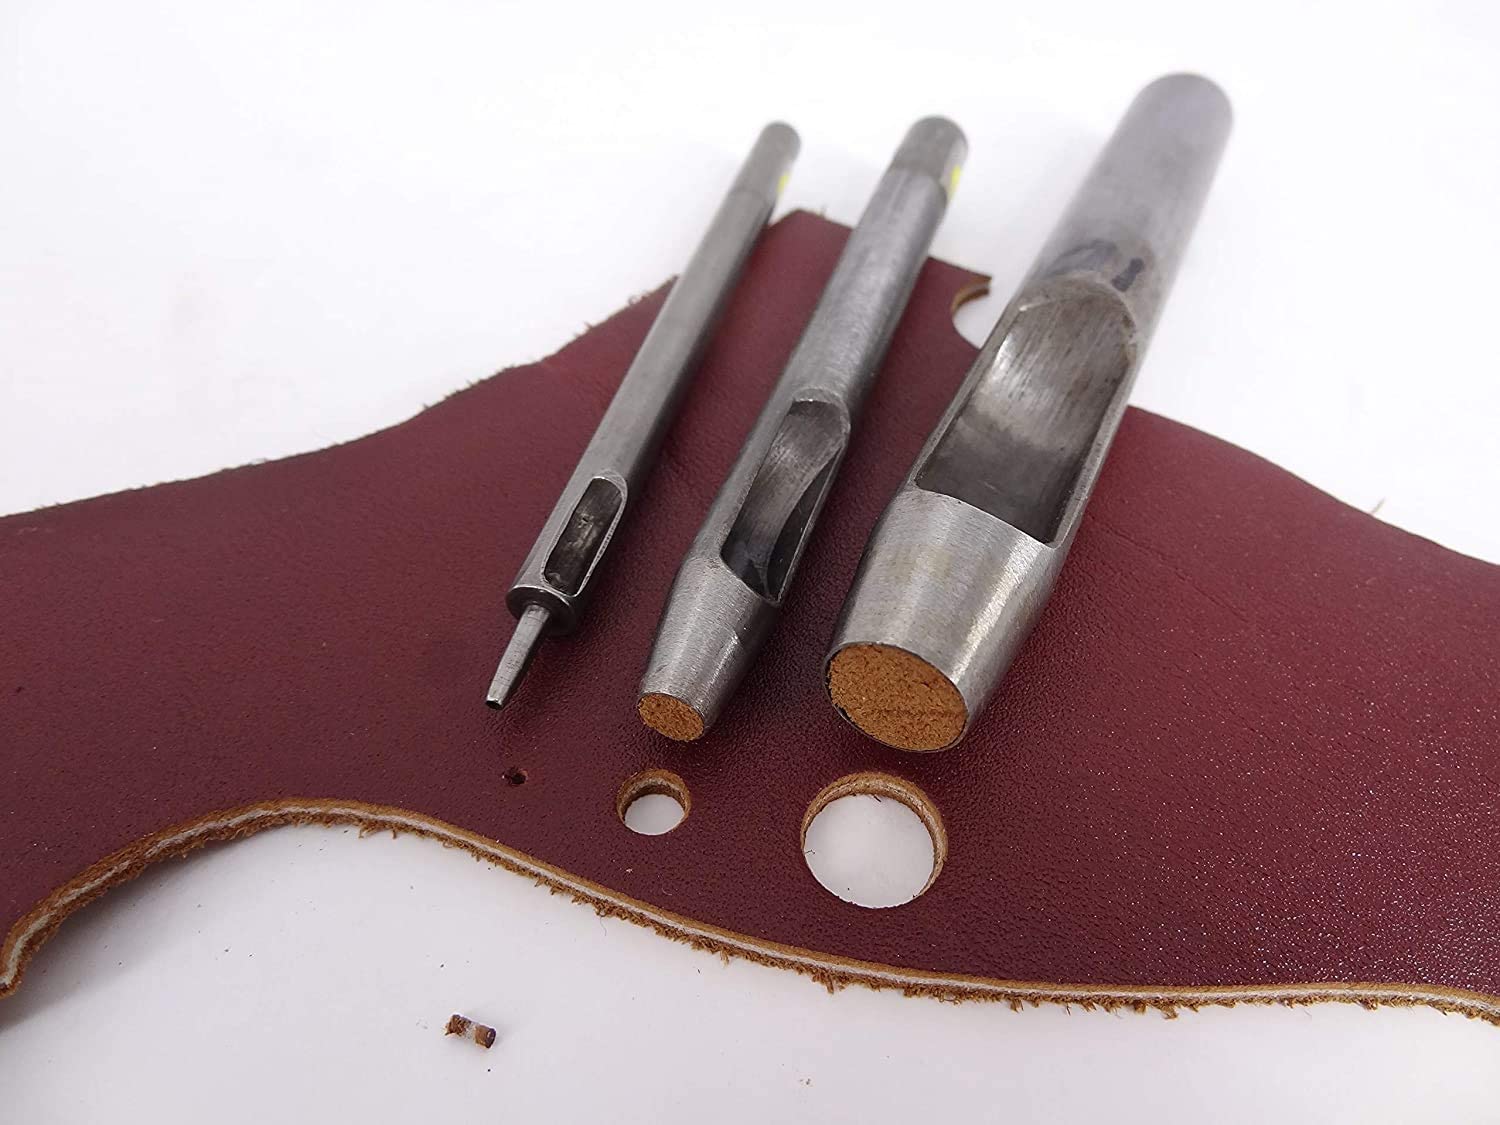 Made in Taiwan 18mm Hole Punch Leather Craft Tool Leather DIY Round